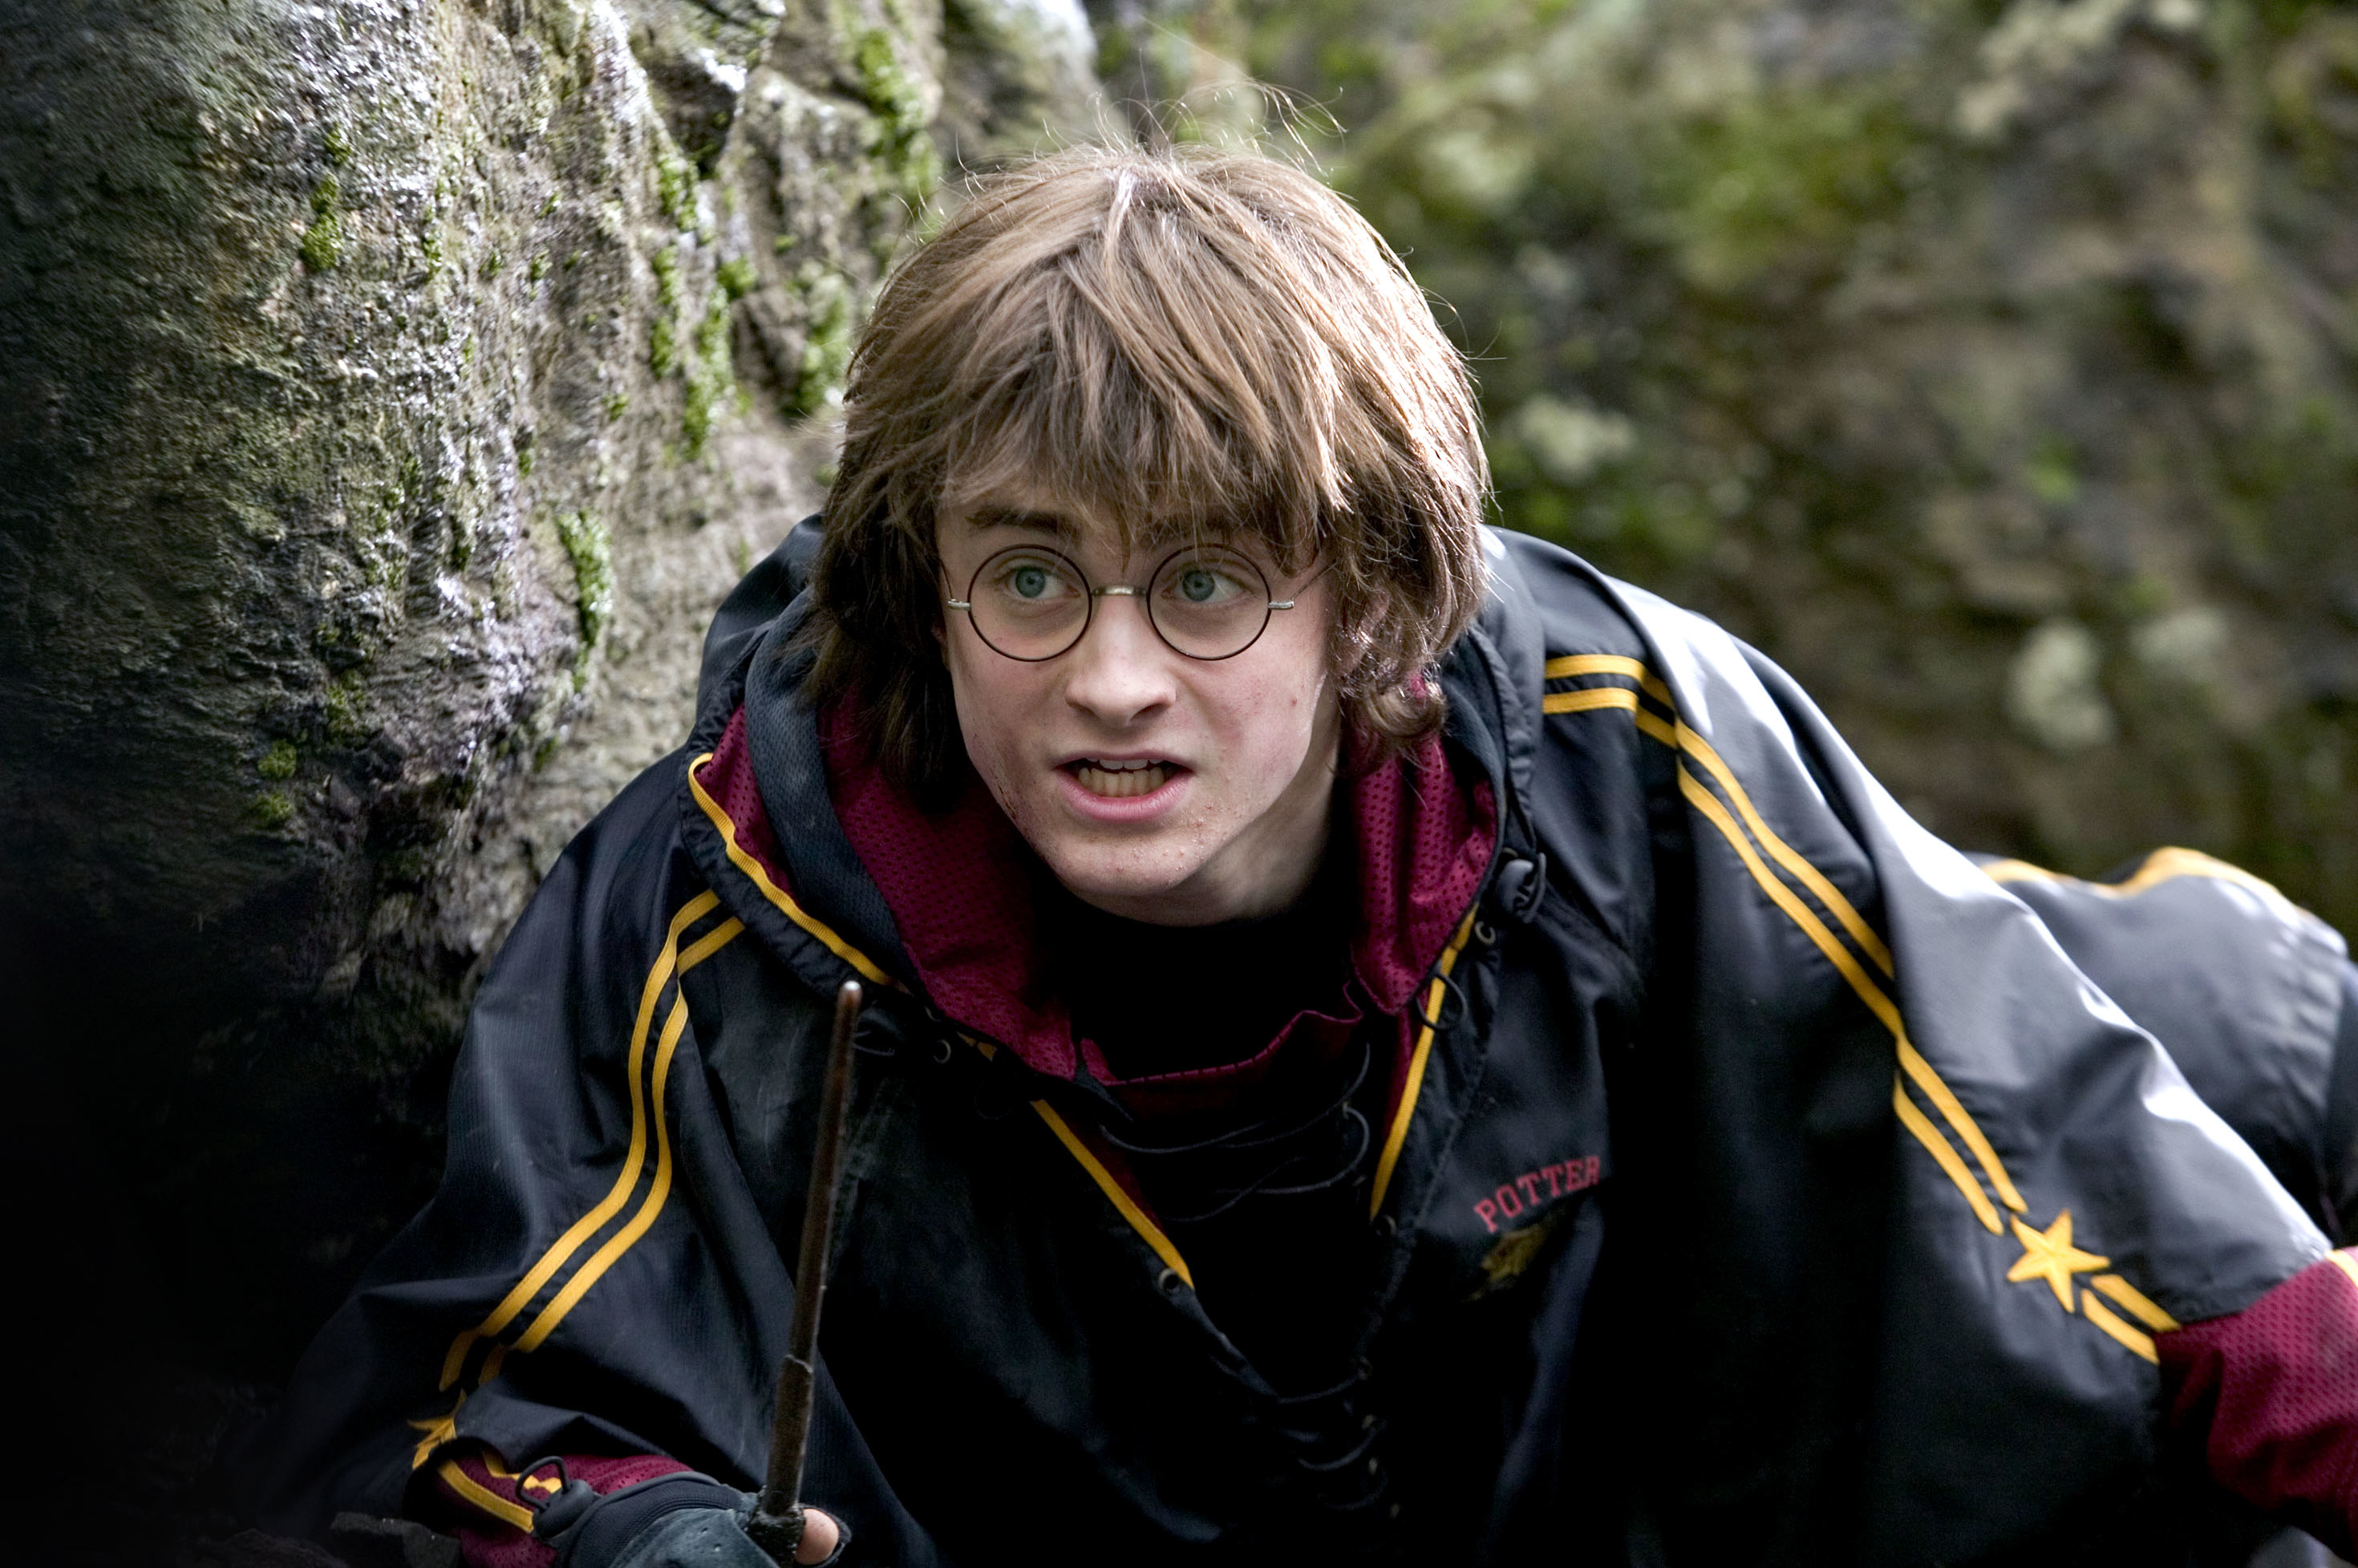 Harry Potter in Quidditch robes looking focused with a wand in hand